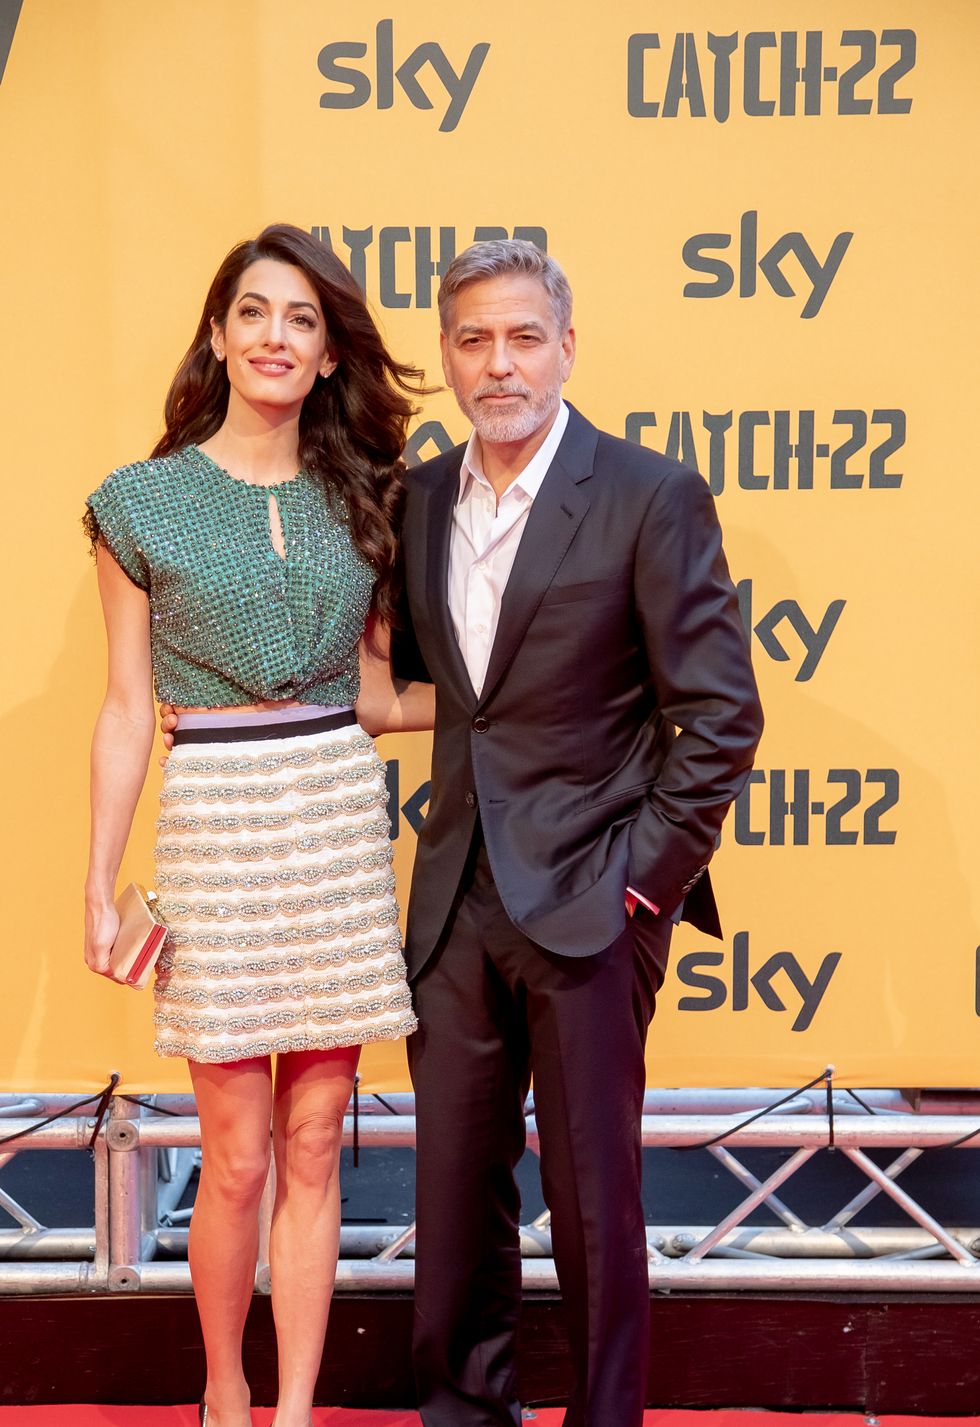 Red Carpet Preview Of The Sky Catch-22 TV Series